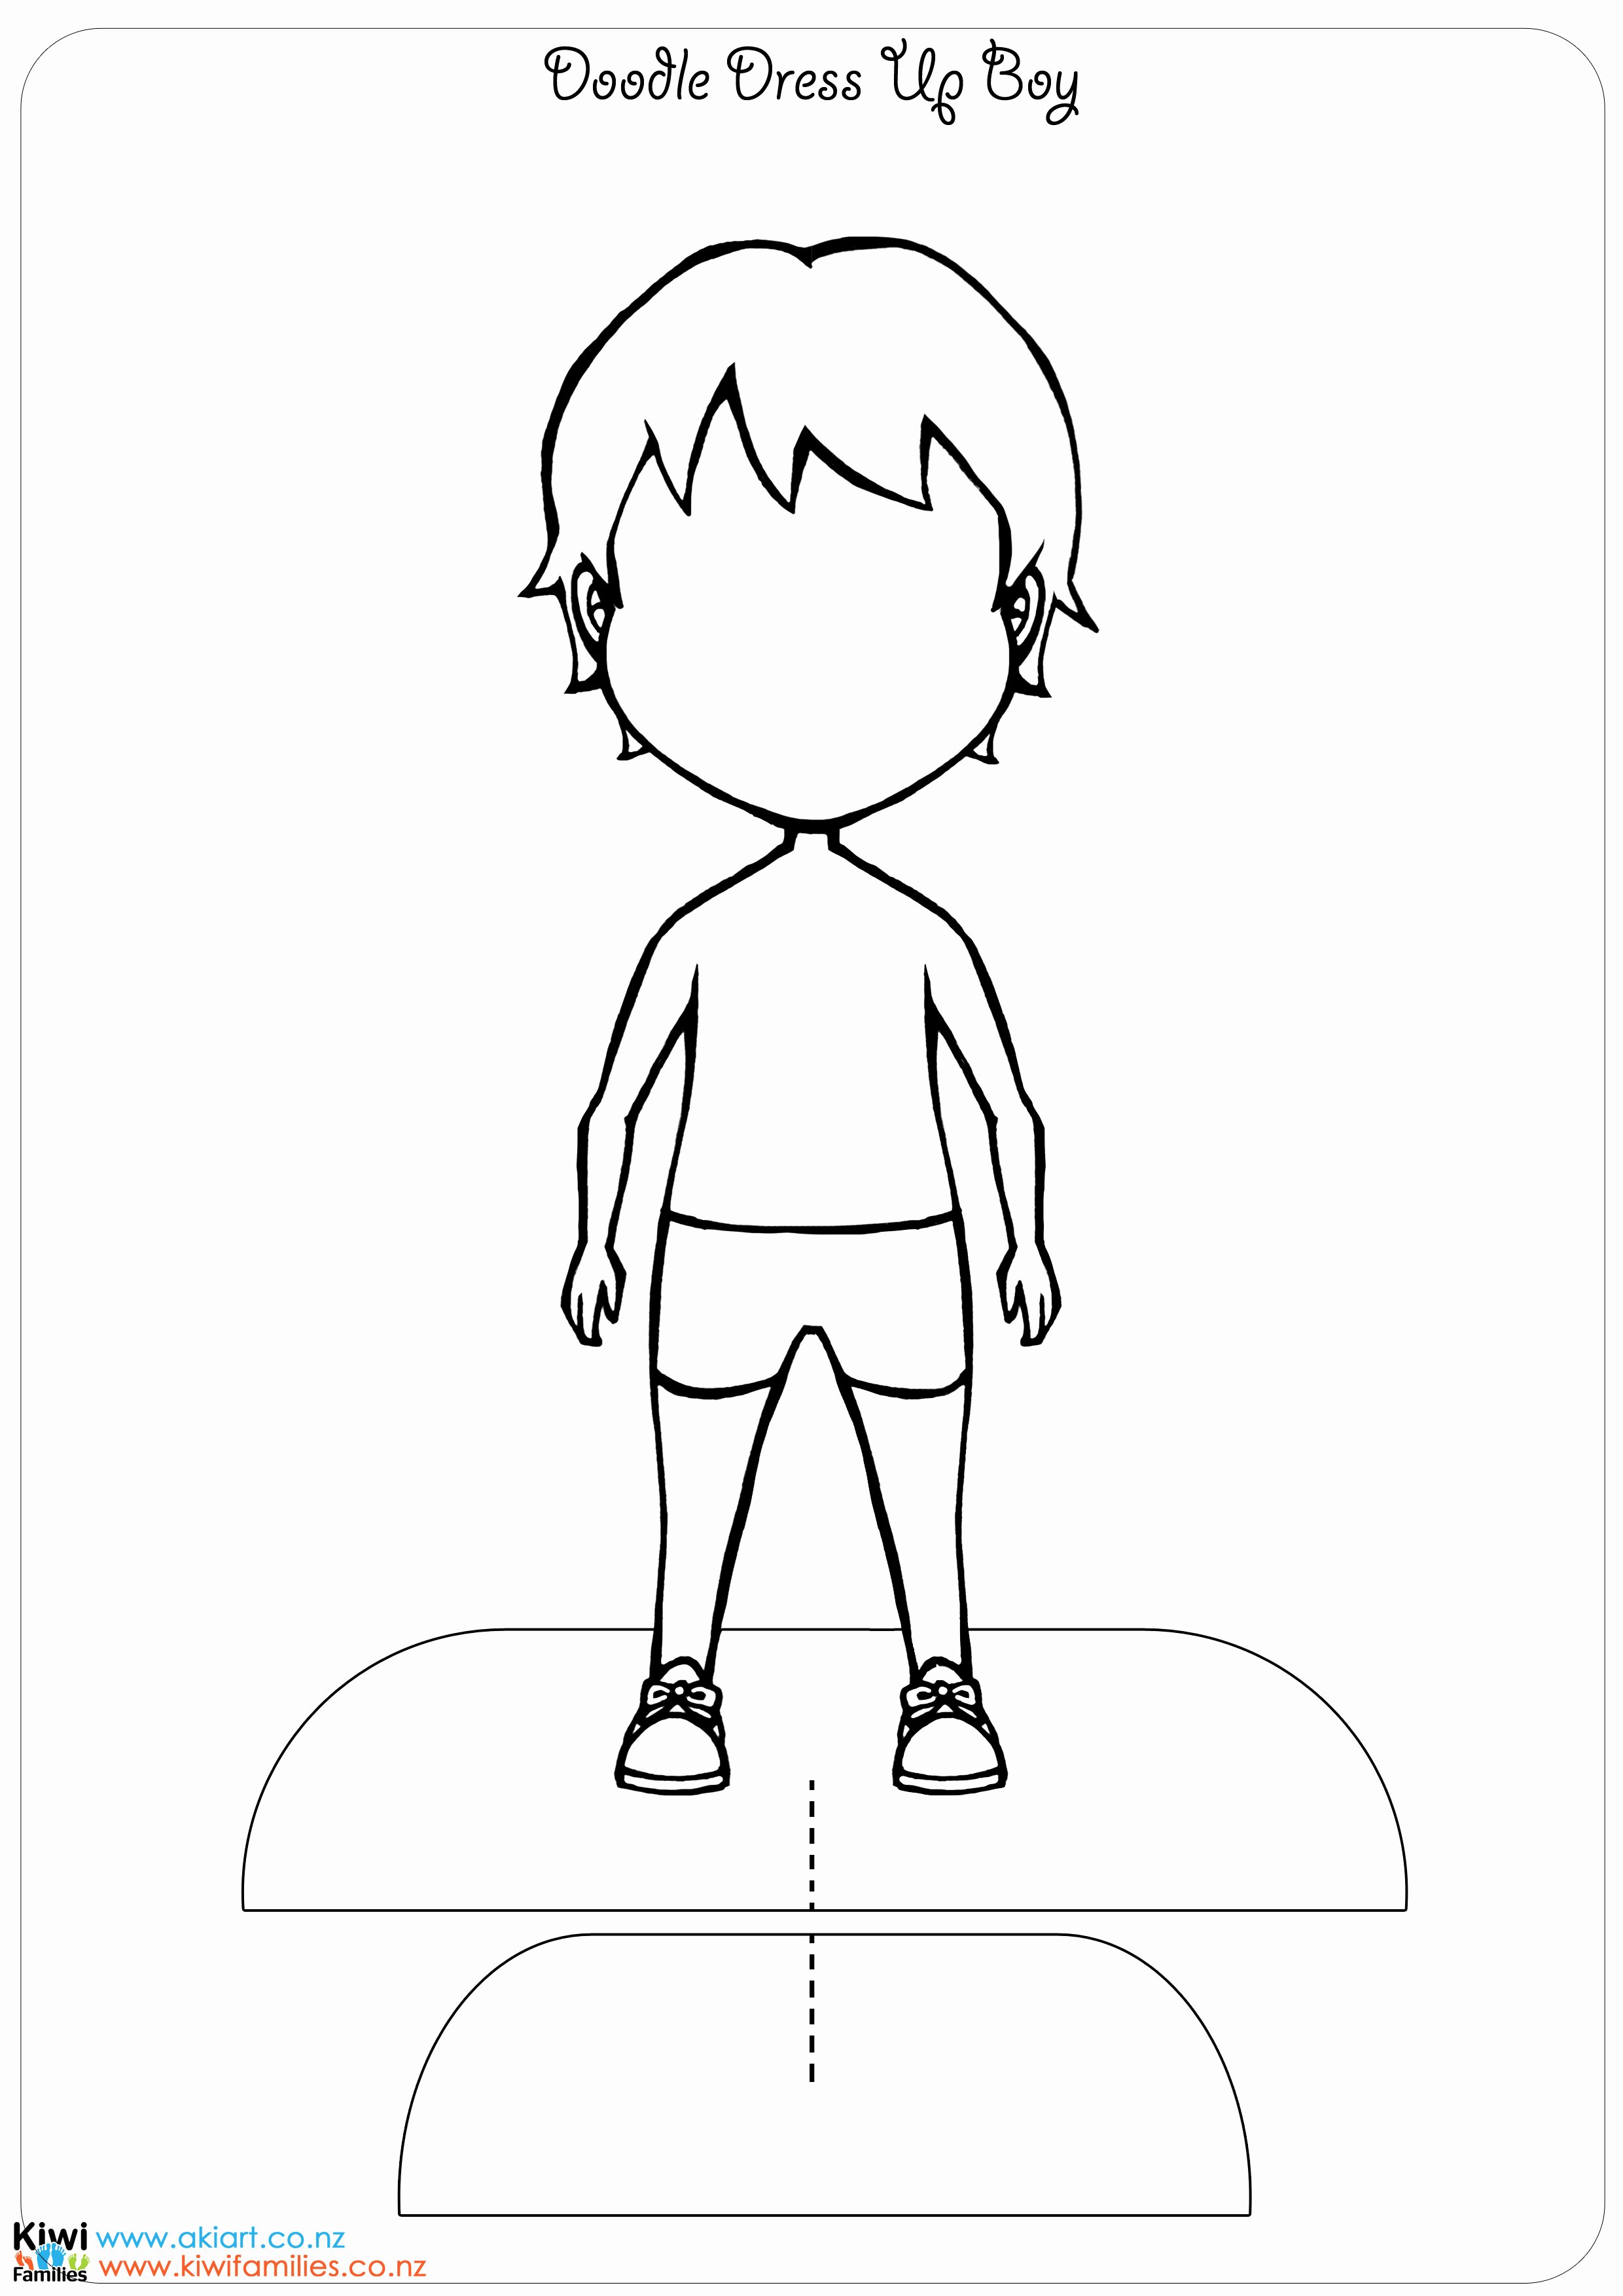 Paper Doll Clothing Template Inspirational Make Your Own Paper Dolls Kiwi Families